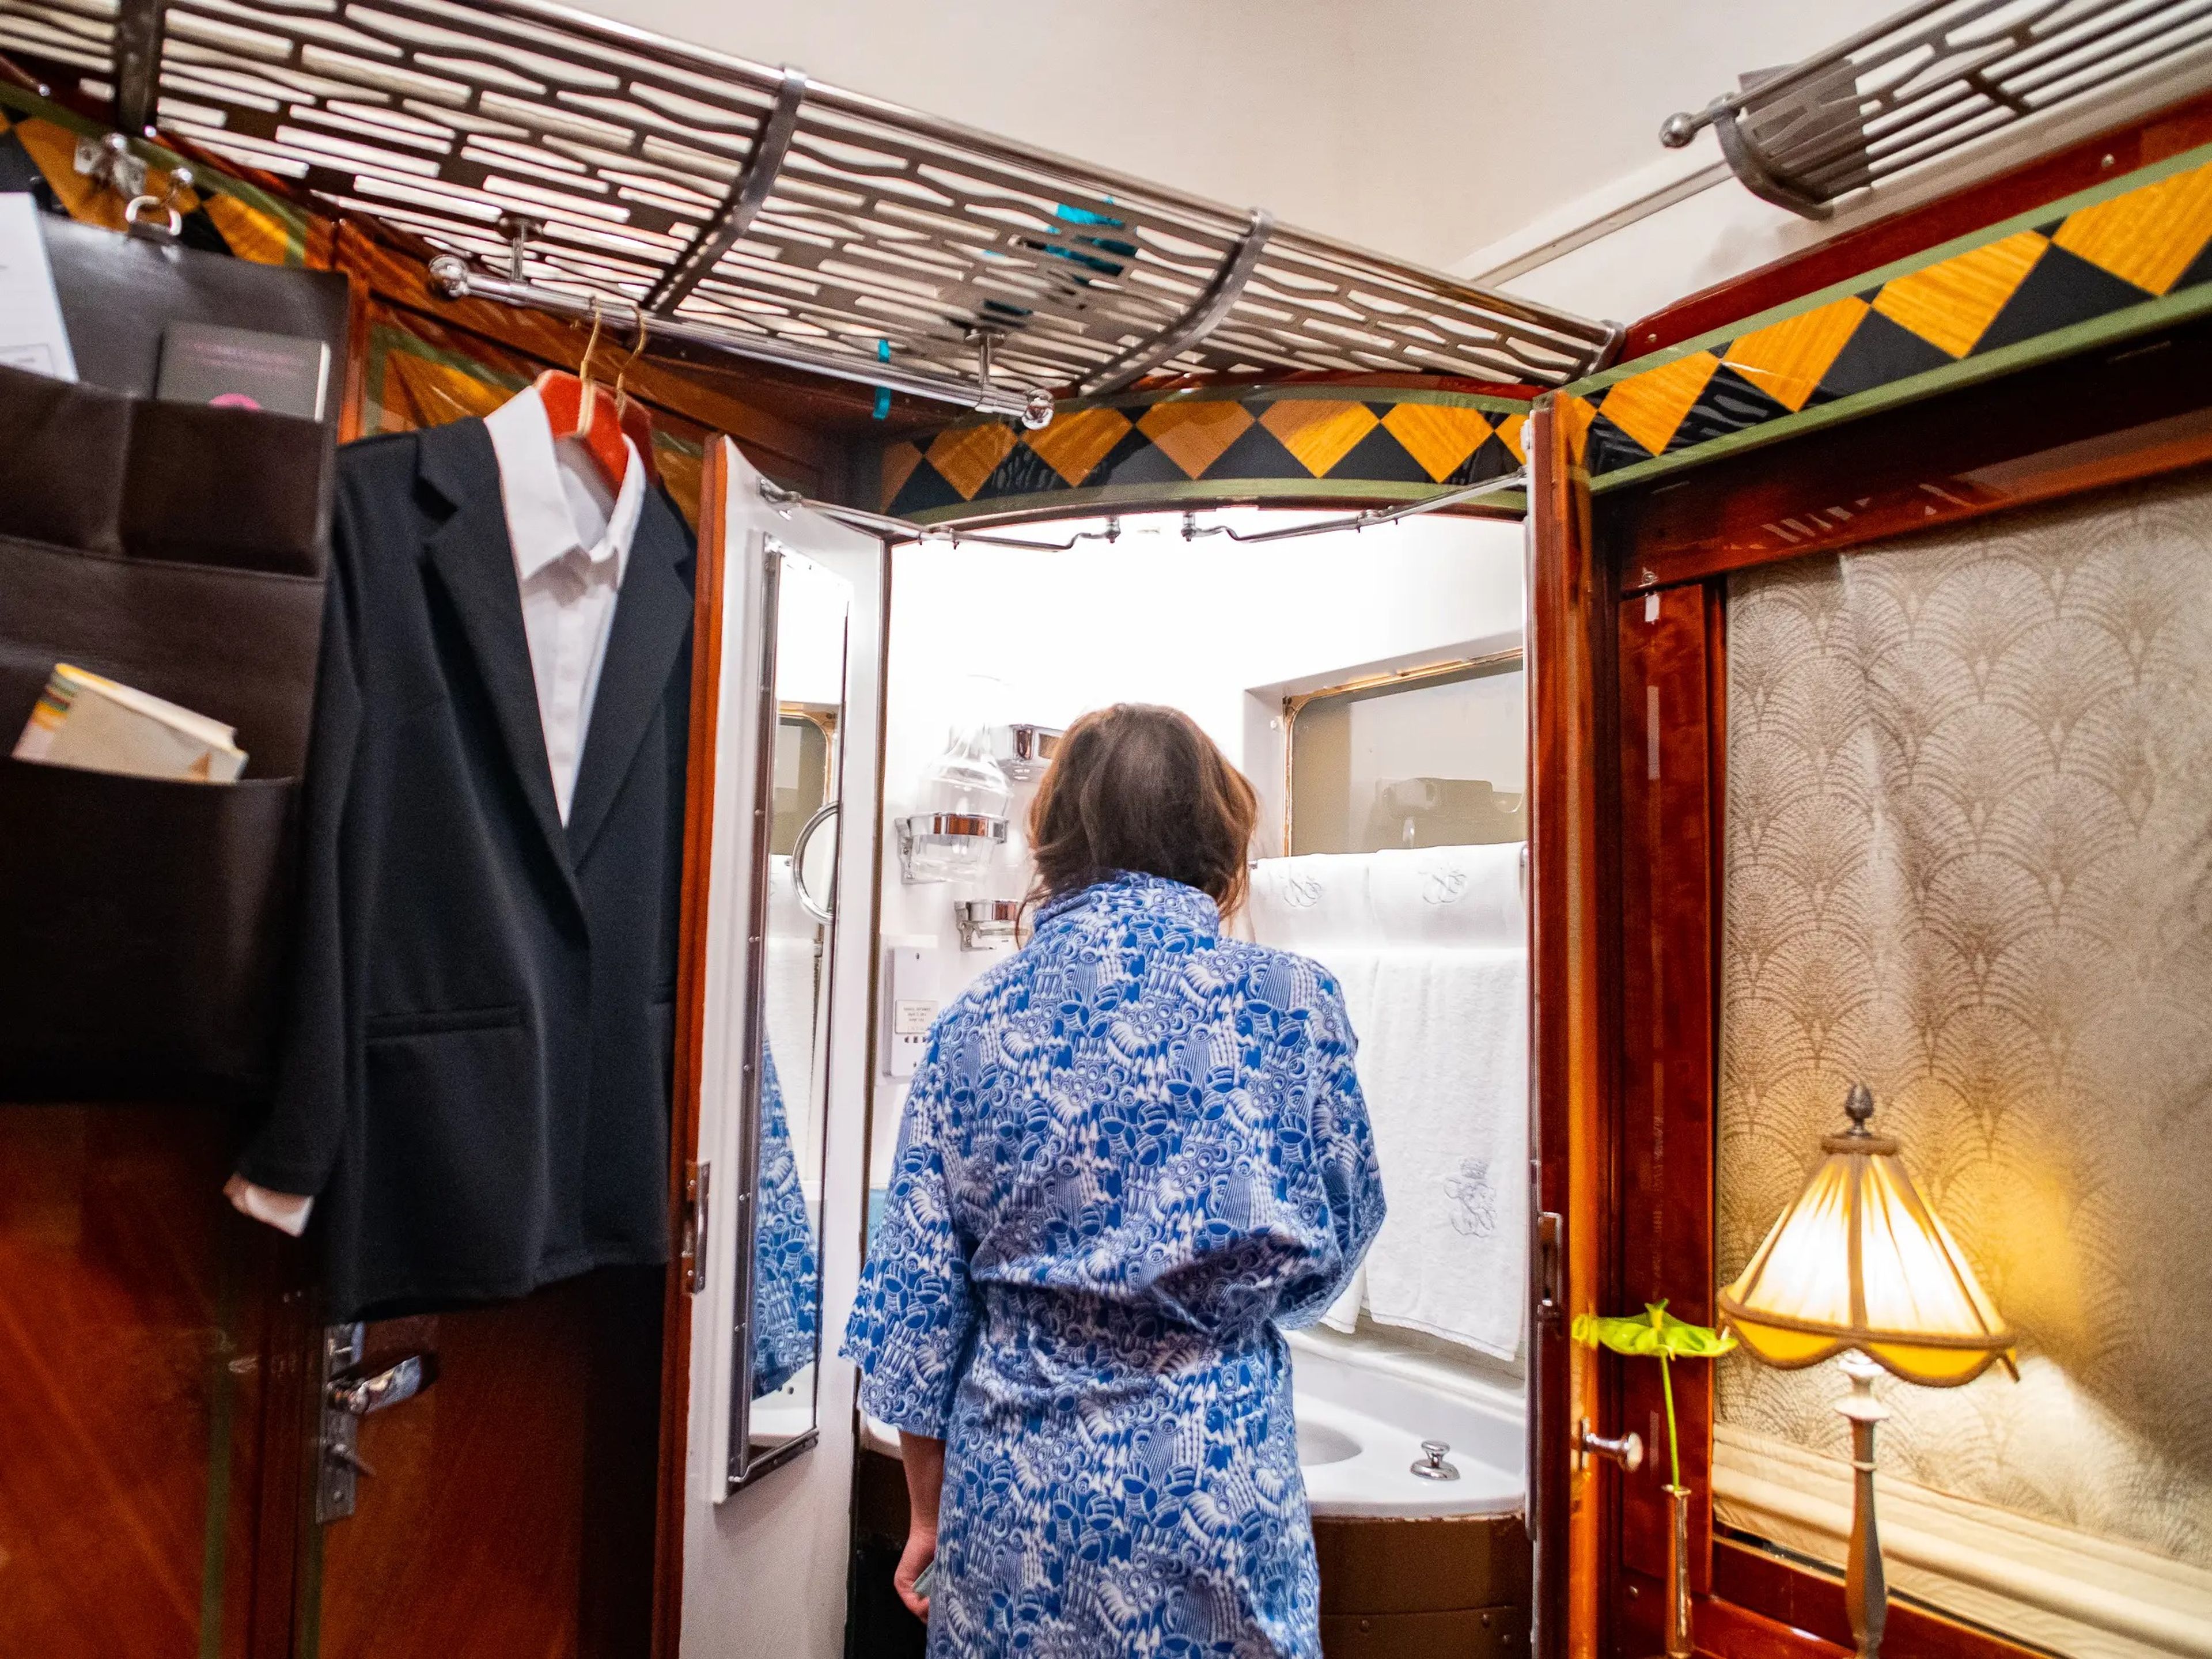 The author stands in front of a vanity of her train cabin with wooden finishes in a blue robe. There's a suit hanging on the left and a lamp on the right.